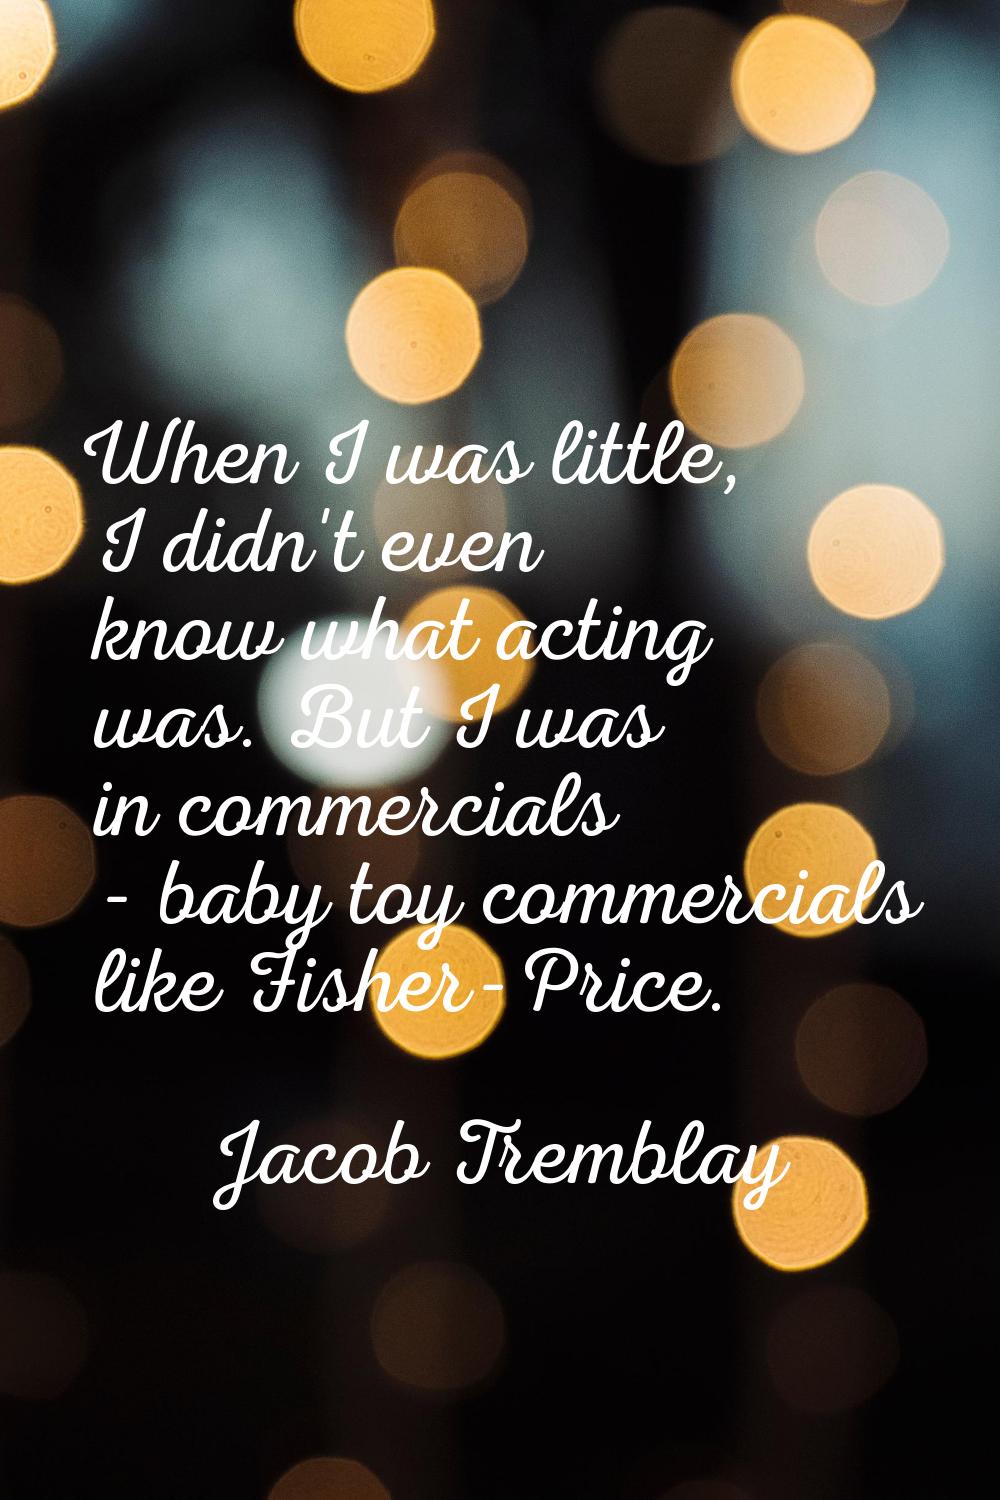 When I was little, I didn't even know what acting was. But I was in commercials - baby toy commerci